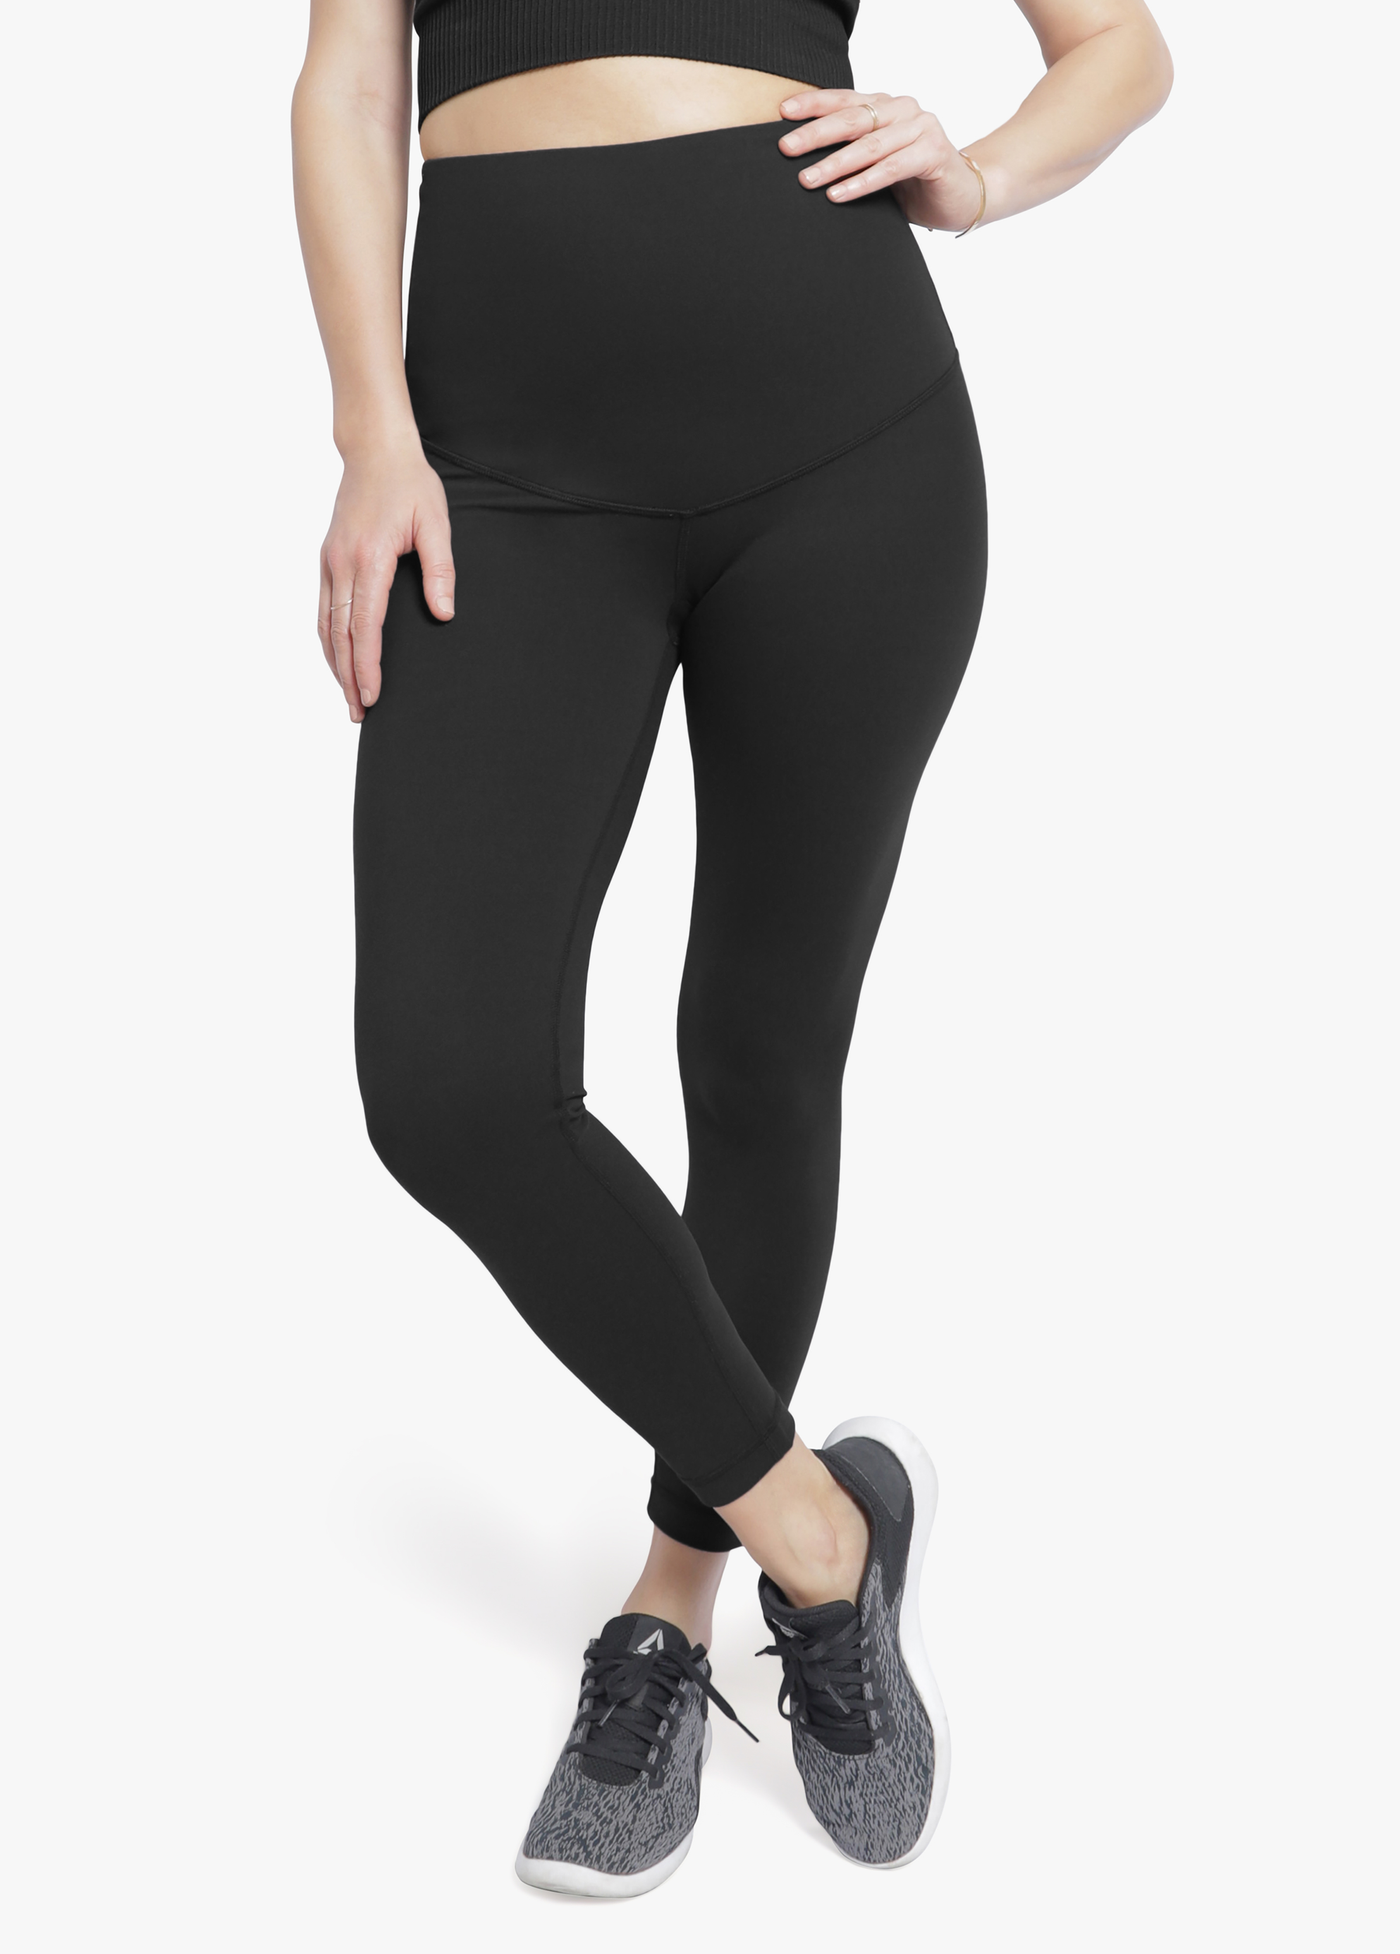 Do Compression Leggings Work Postpartum Support  International Society of  Precision Agriculture